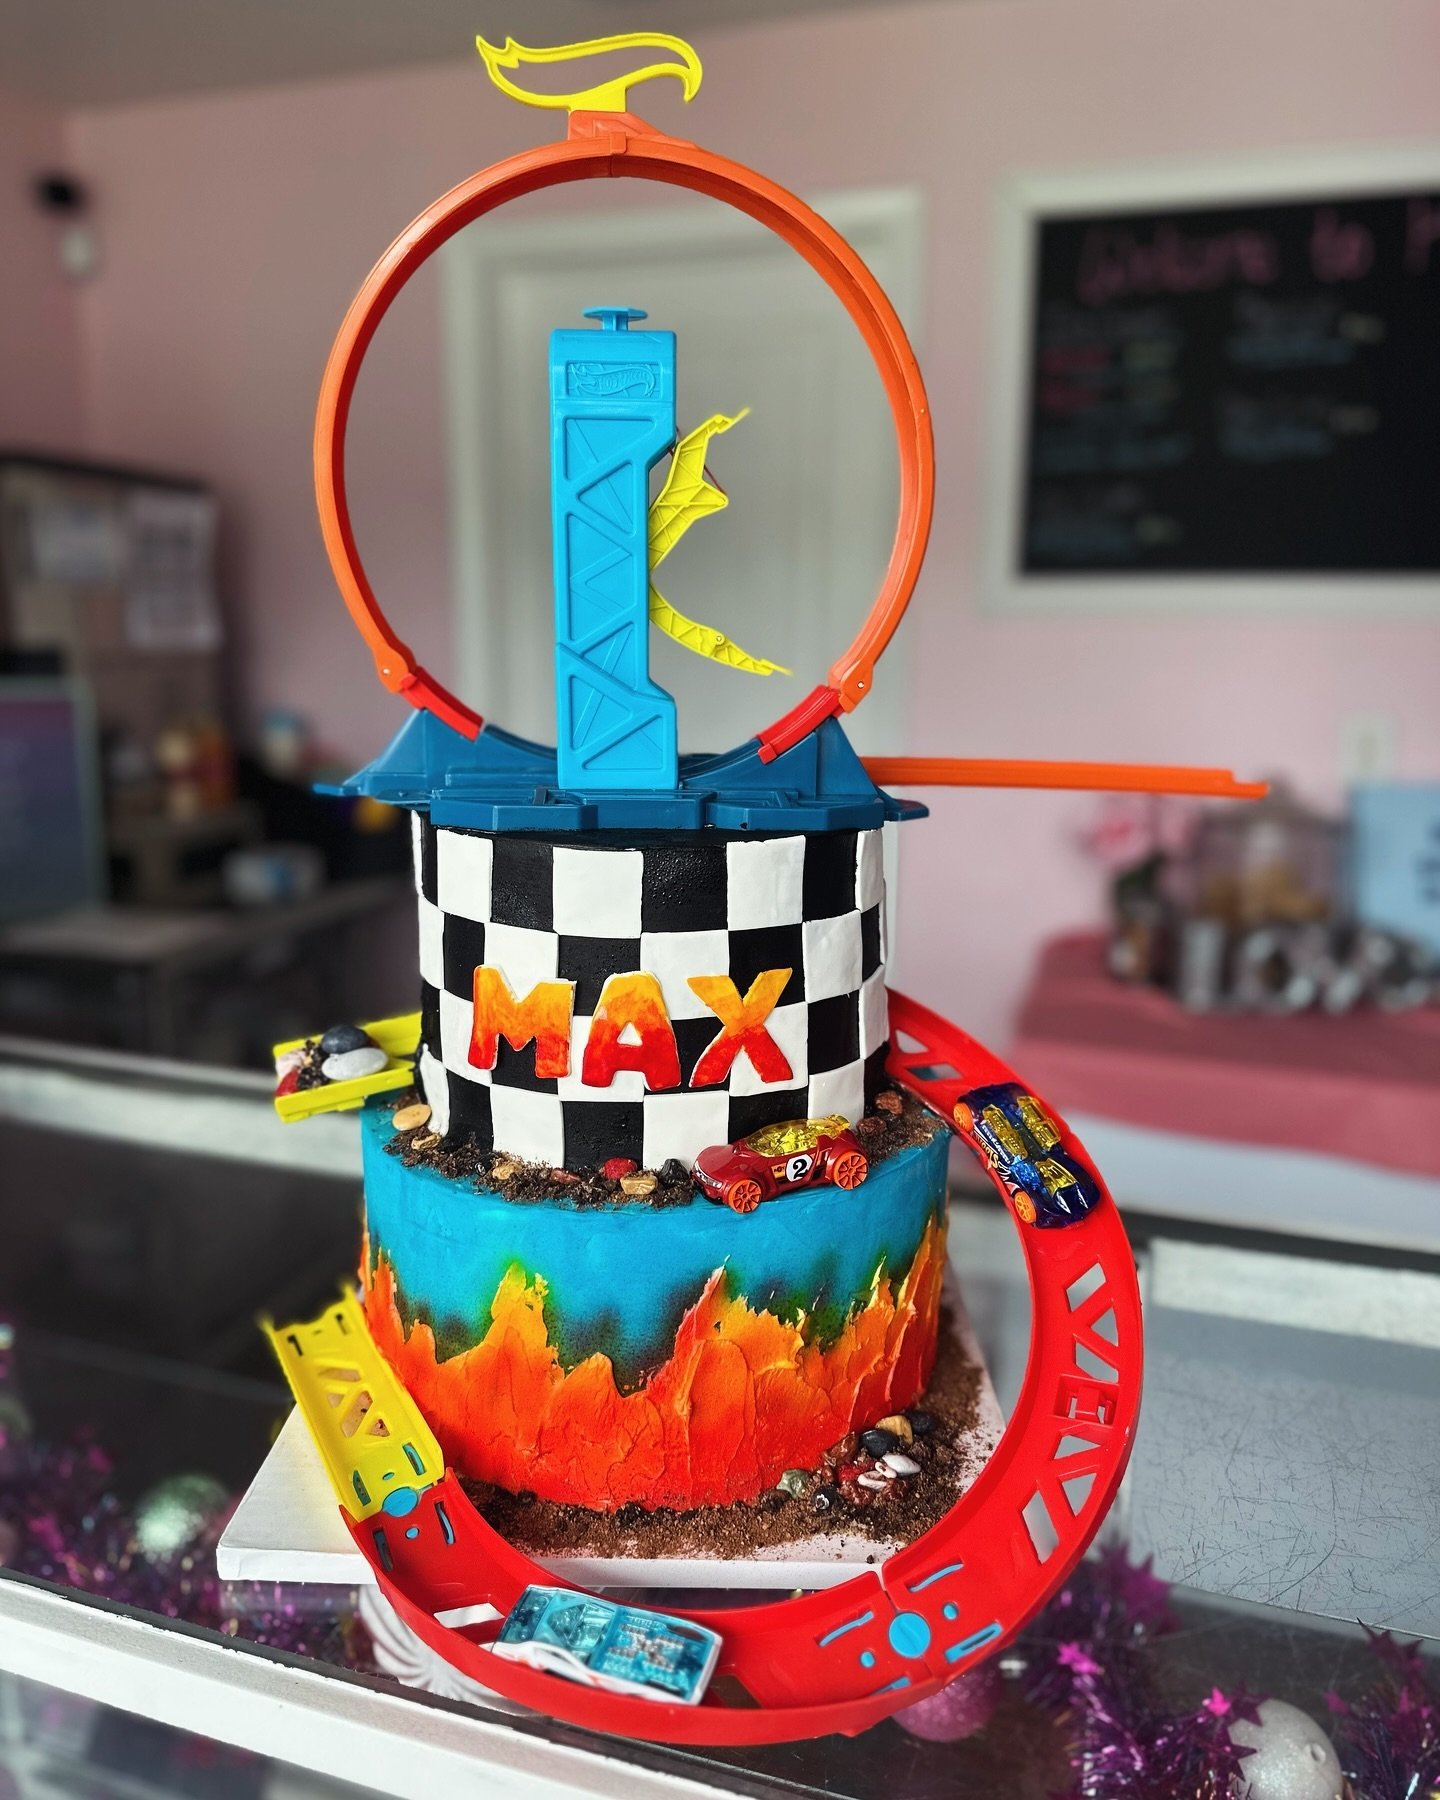 The &ldquo;HOTTEST&rdquo; cake we&rsquo;ve made in awhile!🔥🔥🔥
&bull;
This hot wheel themed cake was super fun to create! I may have played with the extra track pieces for an hour before adding it to the cake! 🤪 The extra orange track piece on the